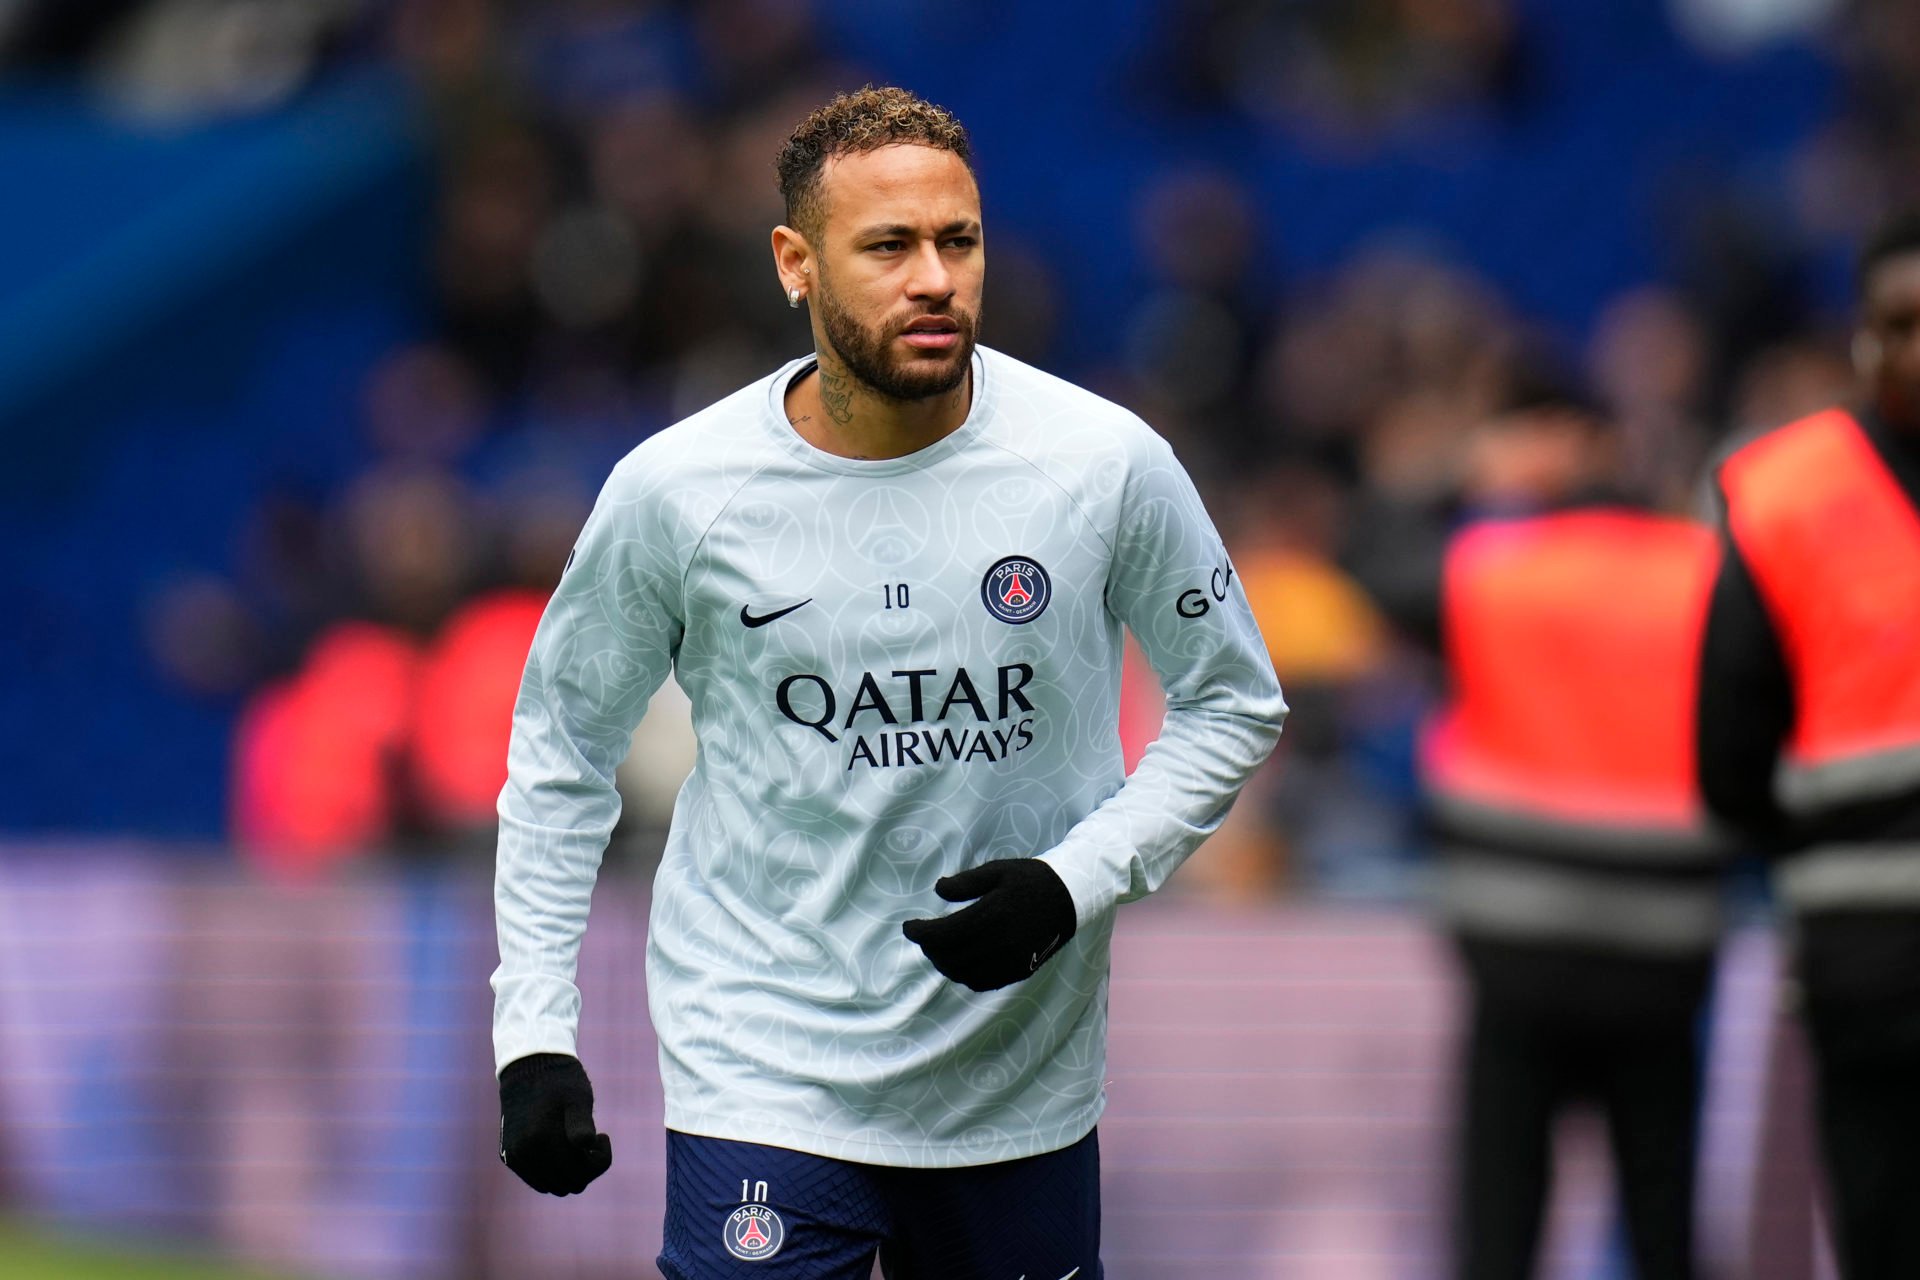 Sky Sports reporter gives update on Neymar to Manchester United